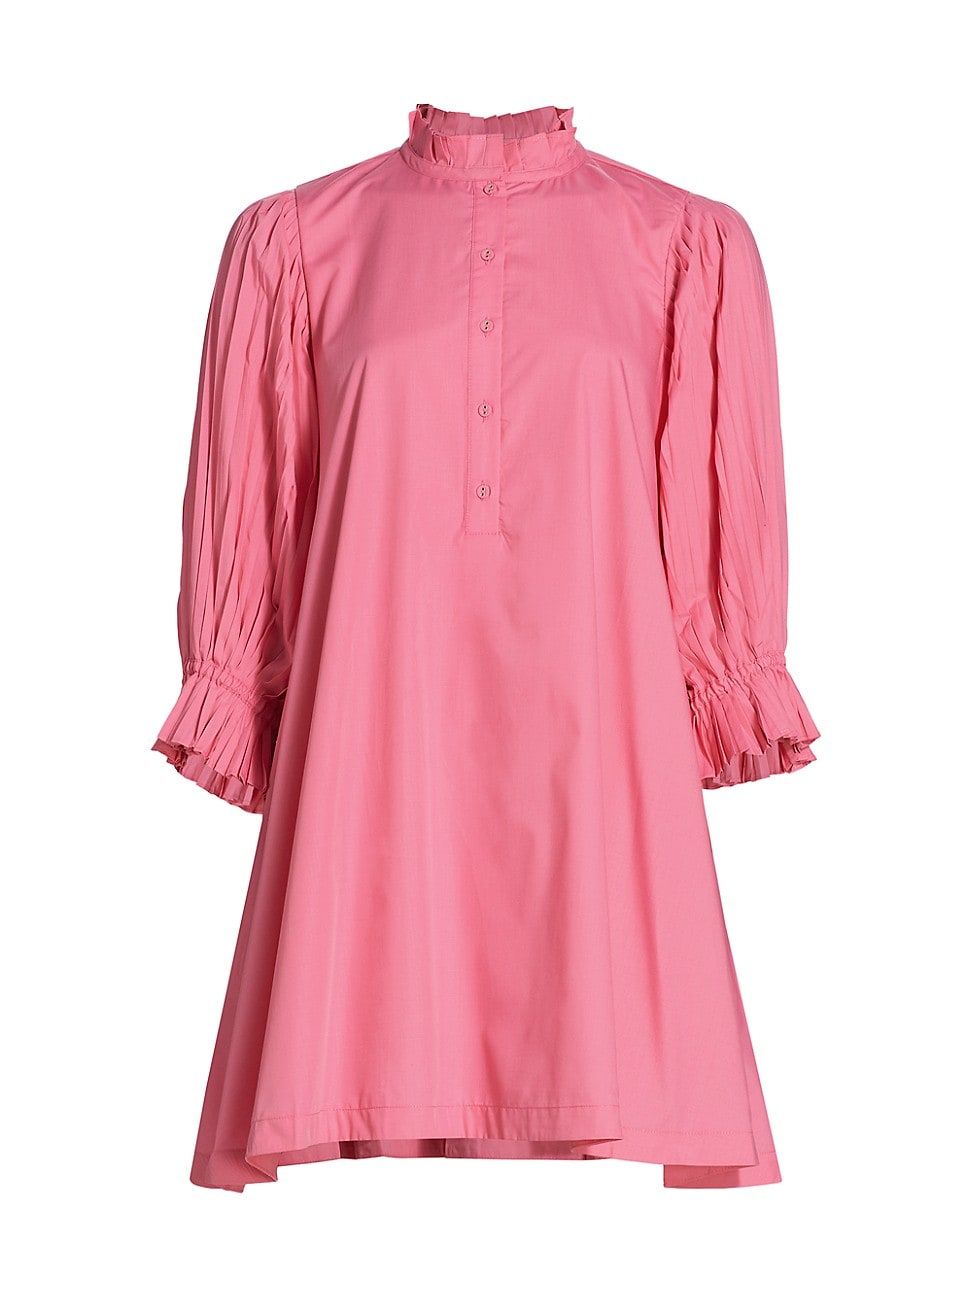 Women's Focus Pleated Minidress - Lt Pink - Size Small - Lt Pink - Size Small | Saks Fifth Avenue